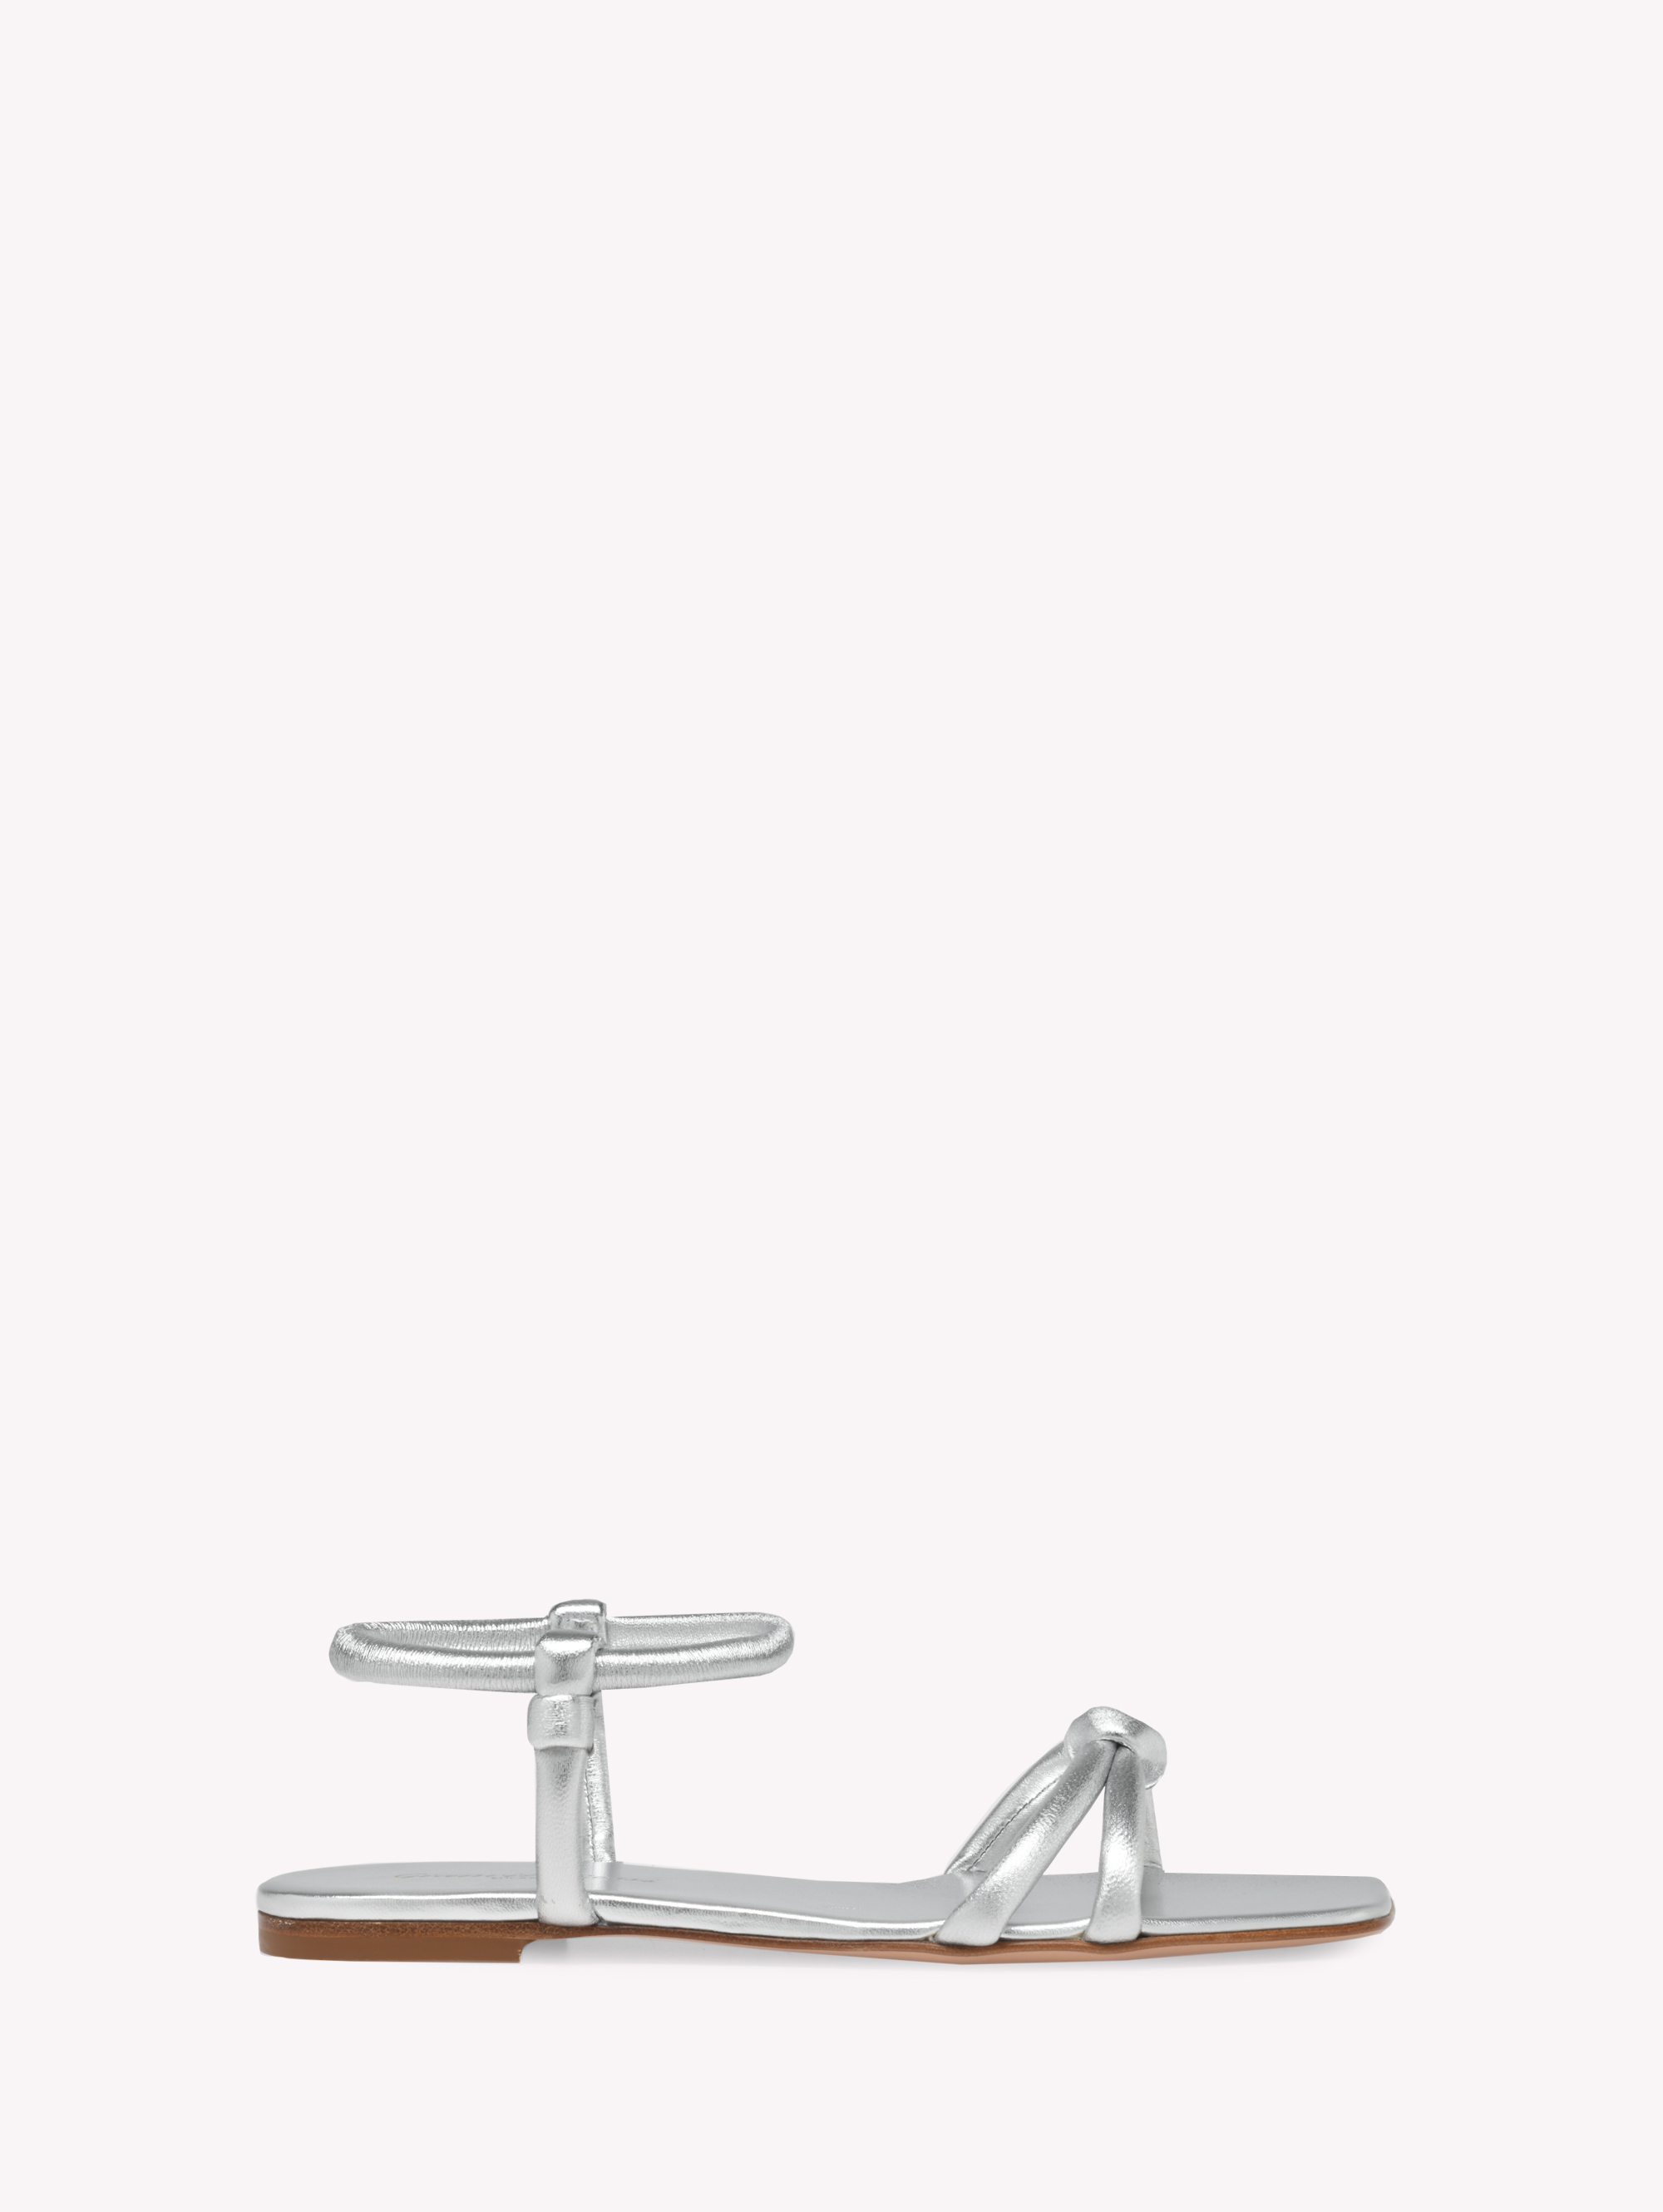 JUNO 05: Flat Shoes for Woman | Gianvito Rossi